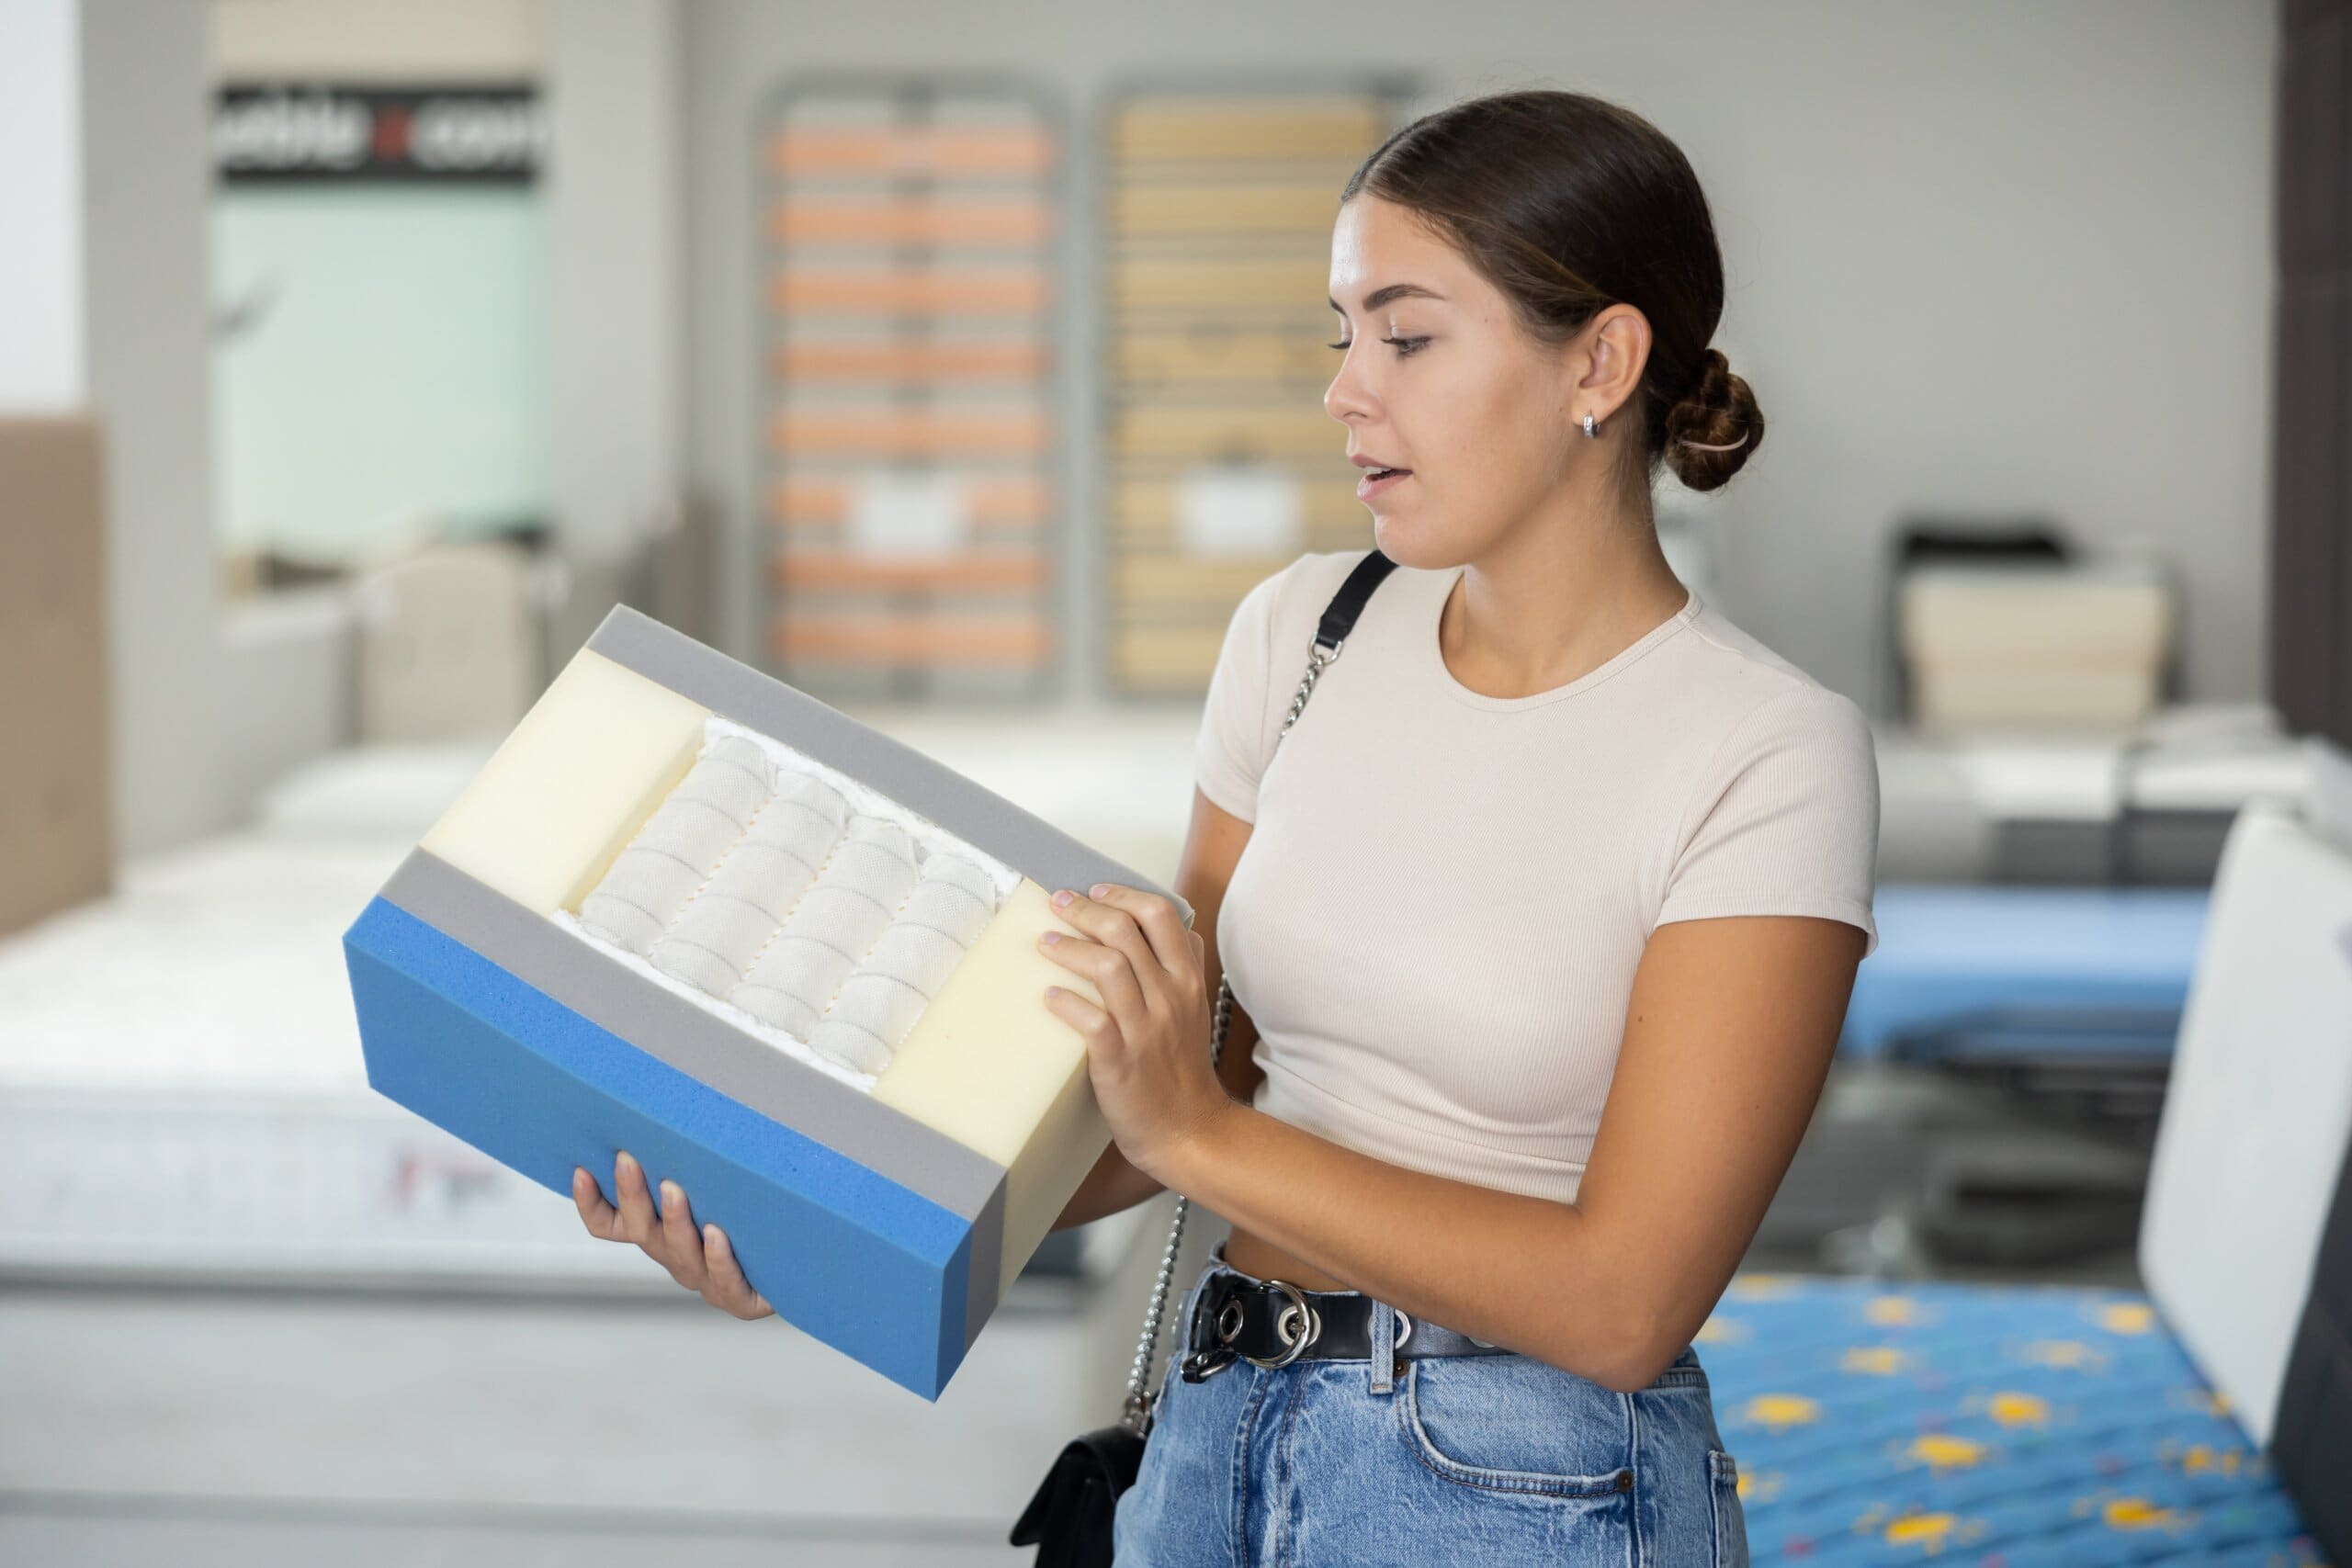 Young woman examines samples structure of spring mattress in furniture store. She studies different types of coils and their varying firmness, determined to find perfect fit.